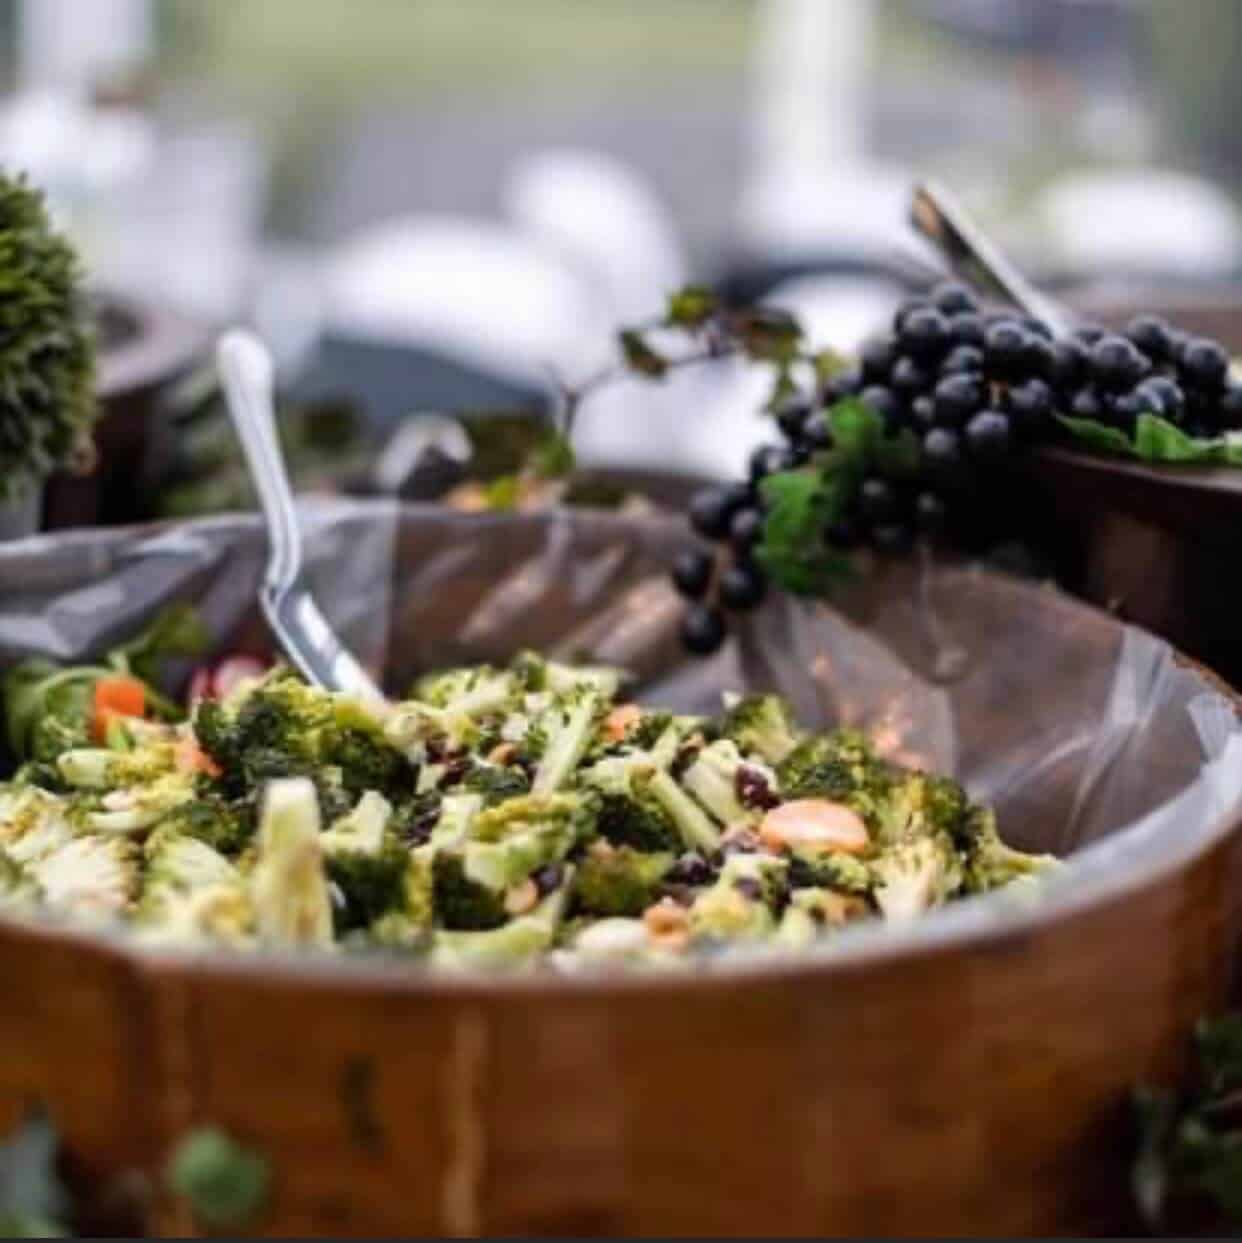 A bowl of broccoli and grapes on a table.